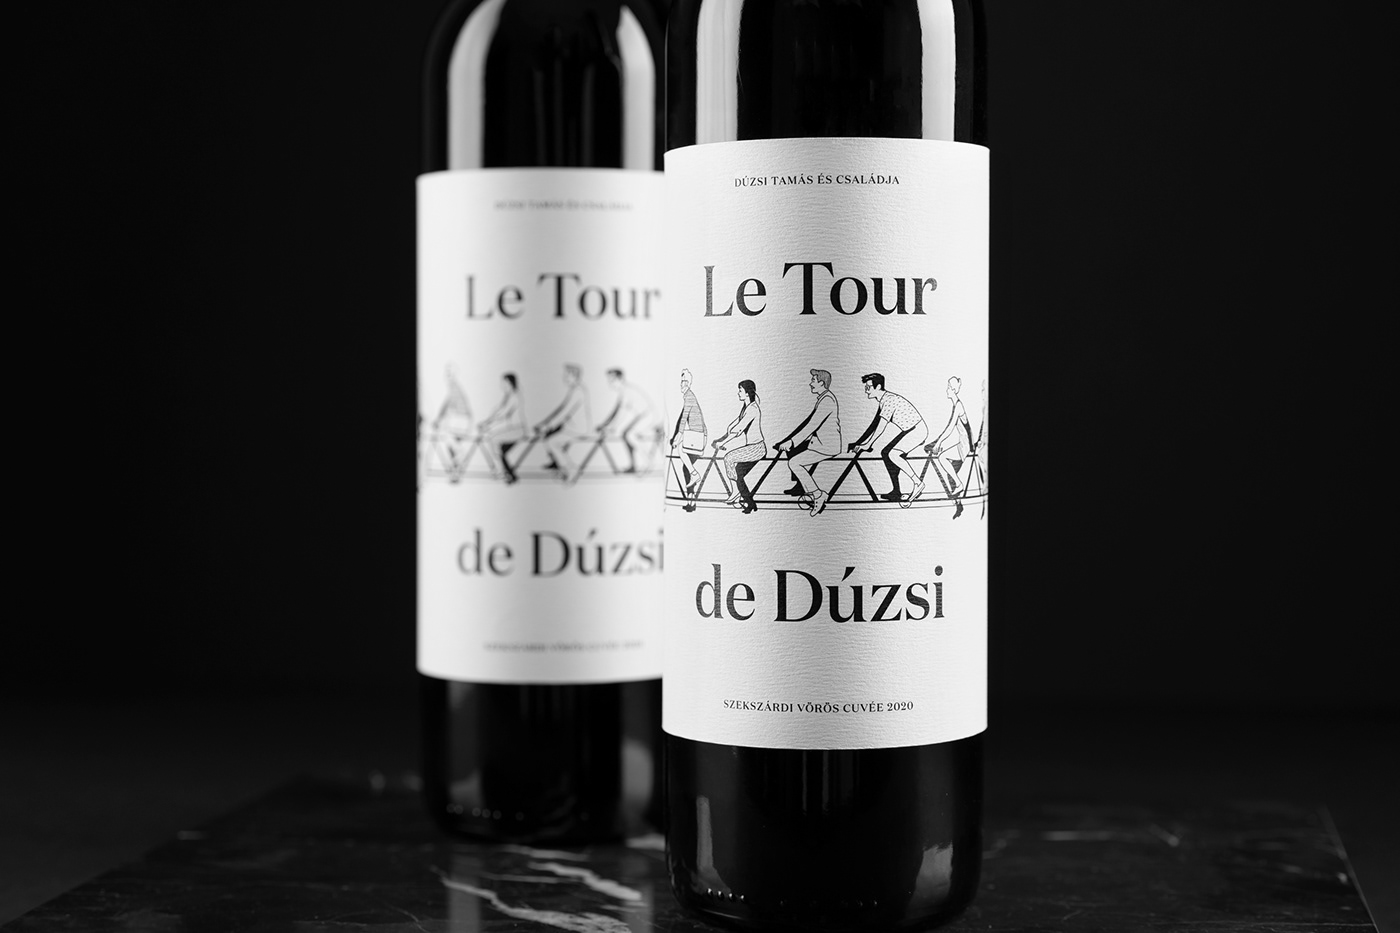 Photo of the illustration and packaging design for a red wine from Dúzsi Tamás Winery